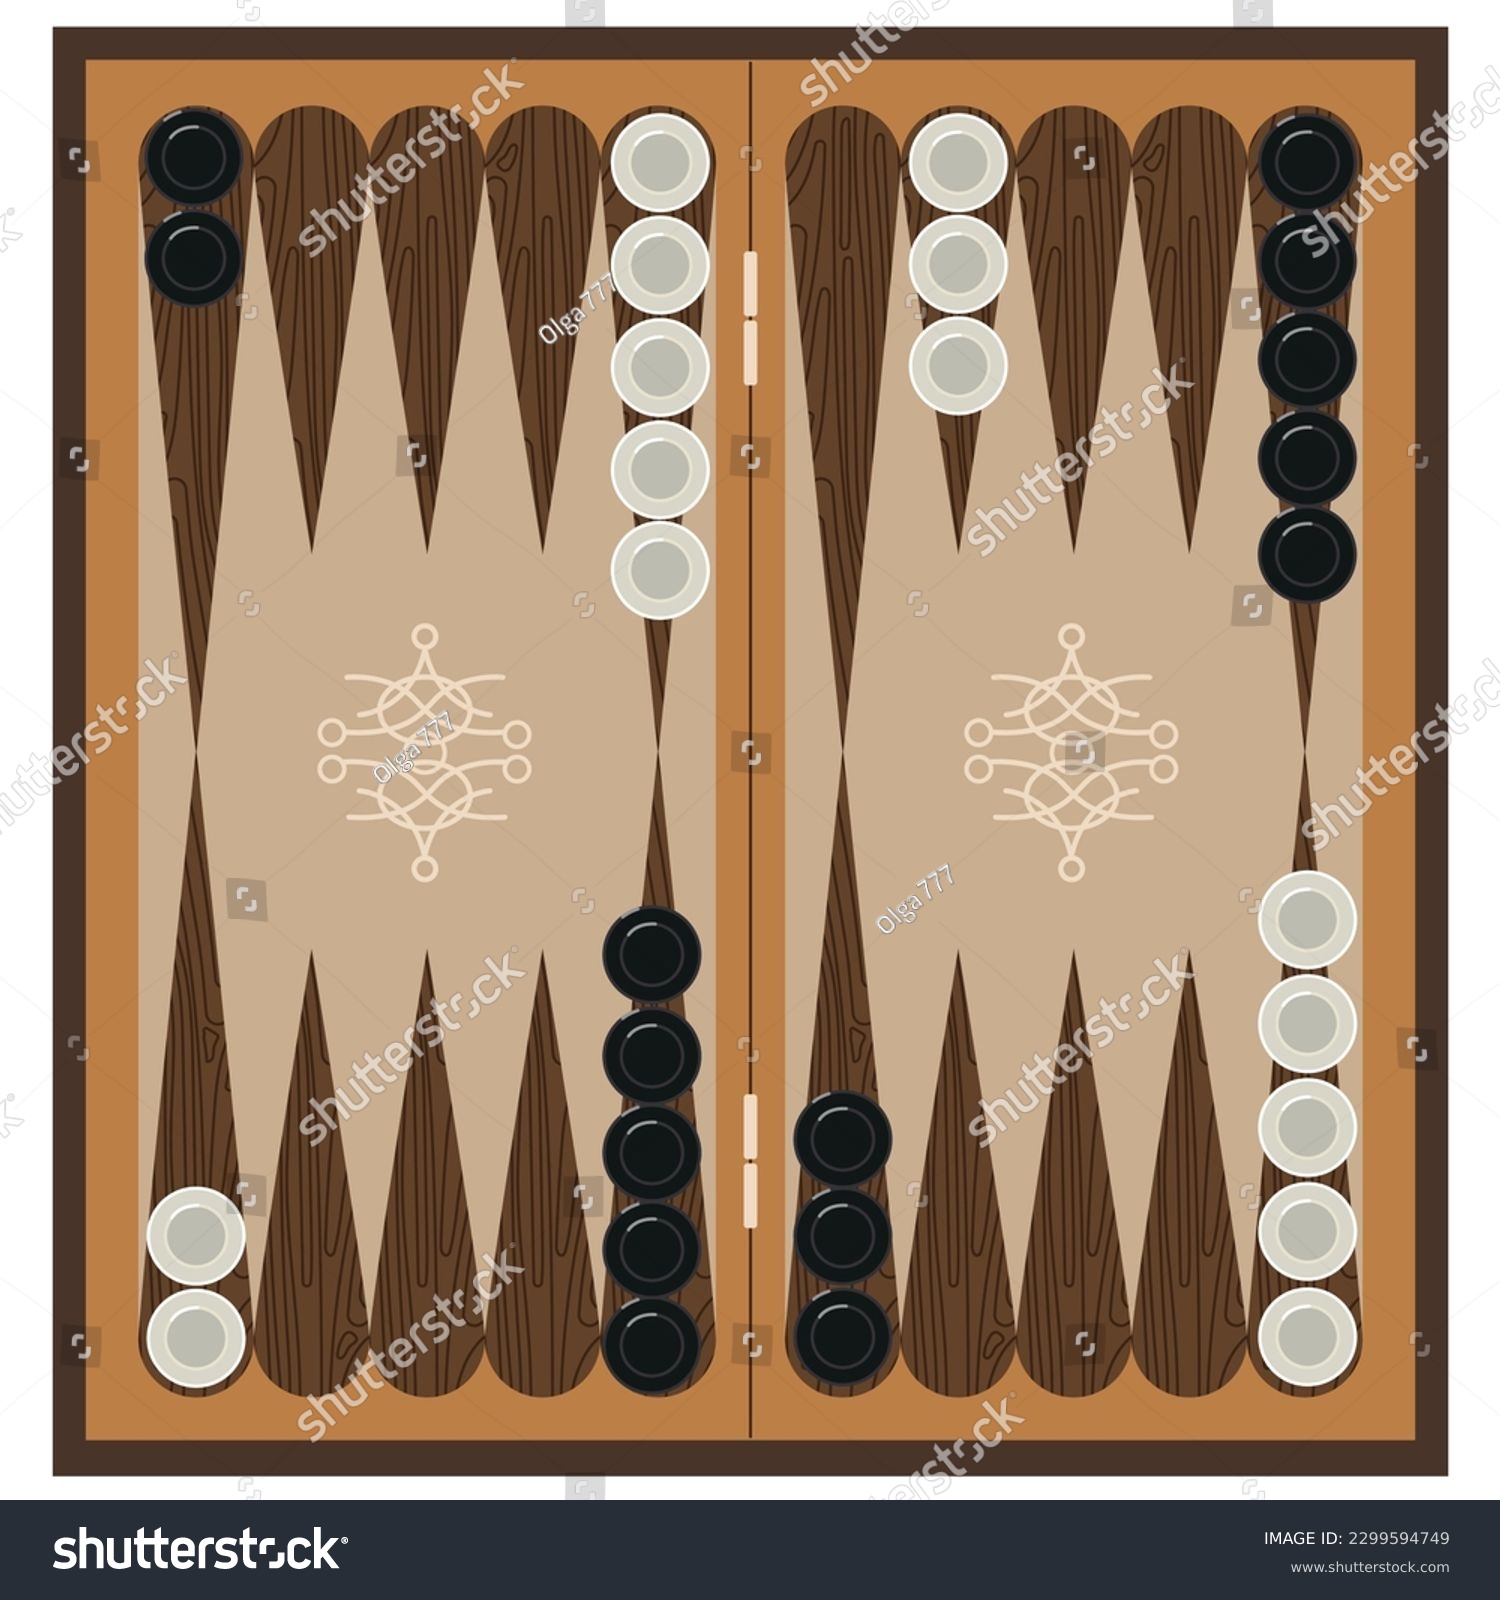 SVG of Backgammon on a white background. Board game of backgammon for recreation. Vector illustration. svg